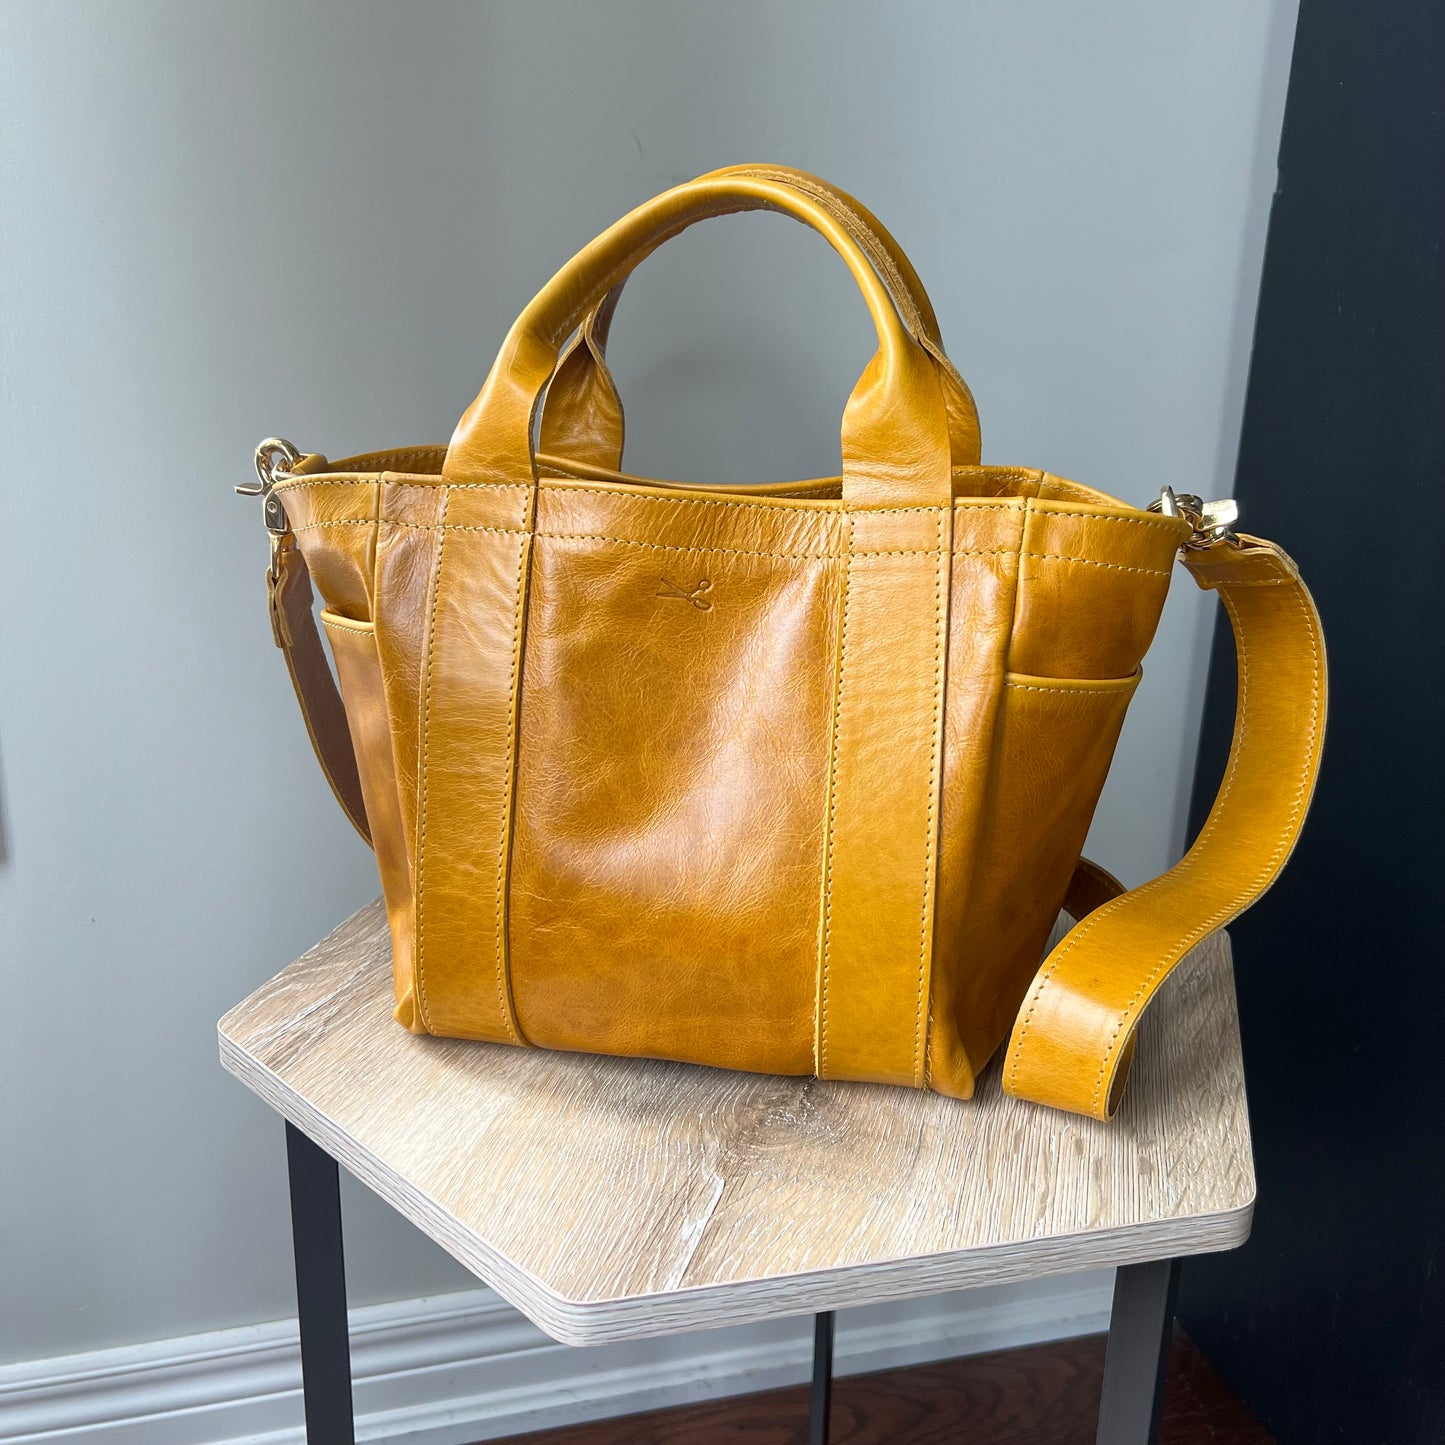 The Commuter Bag- with Leather Strap